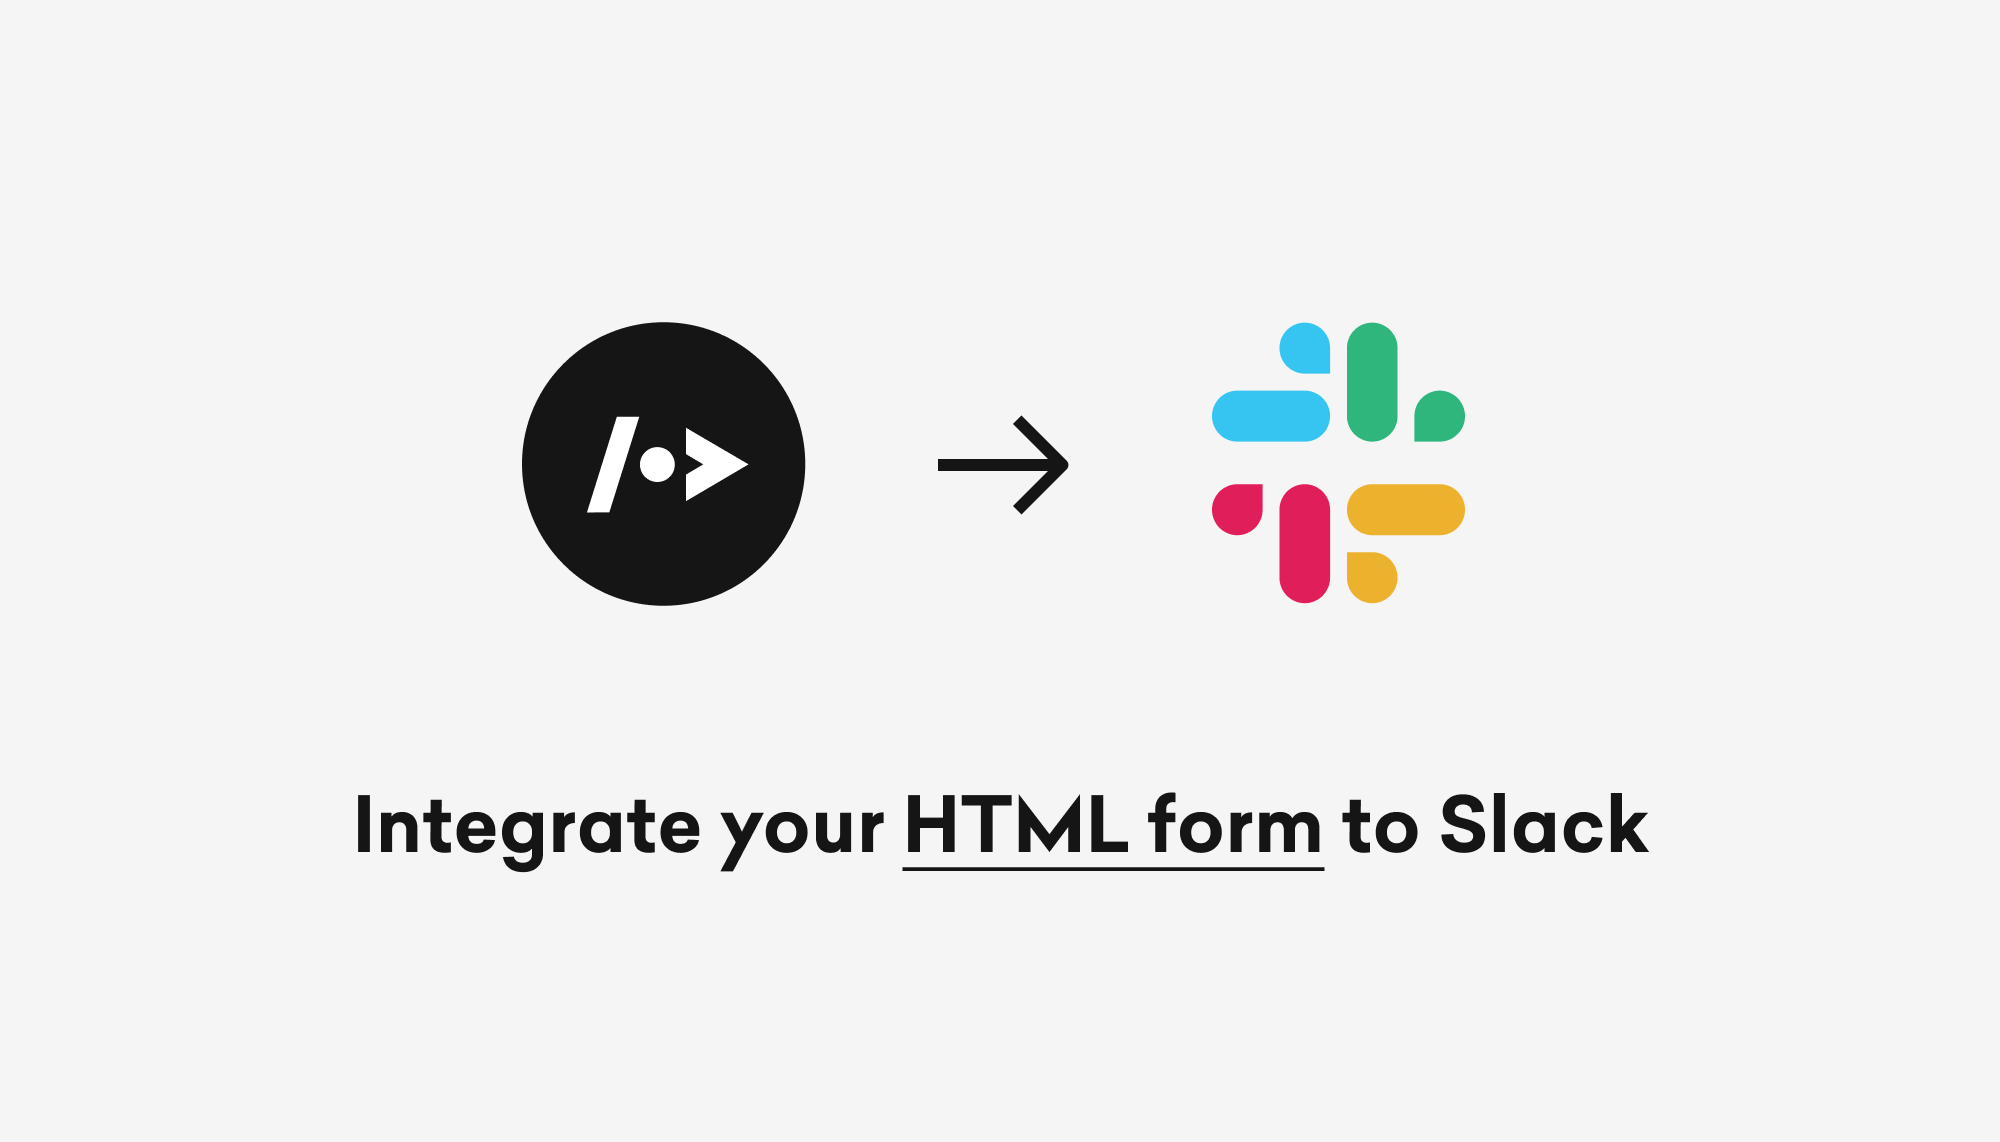 How to integrate your HTML form to Slack